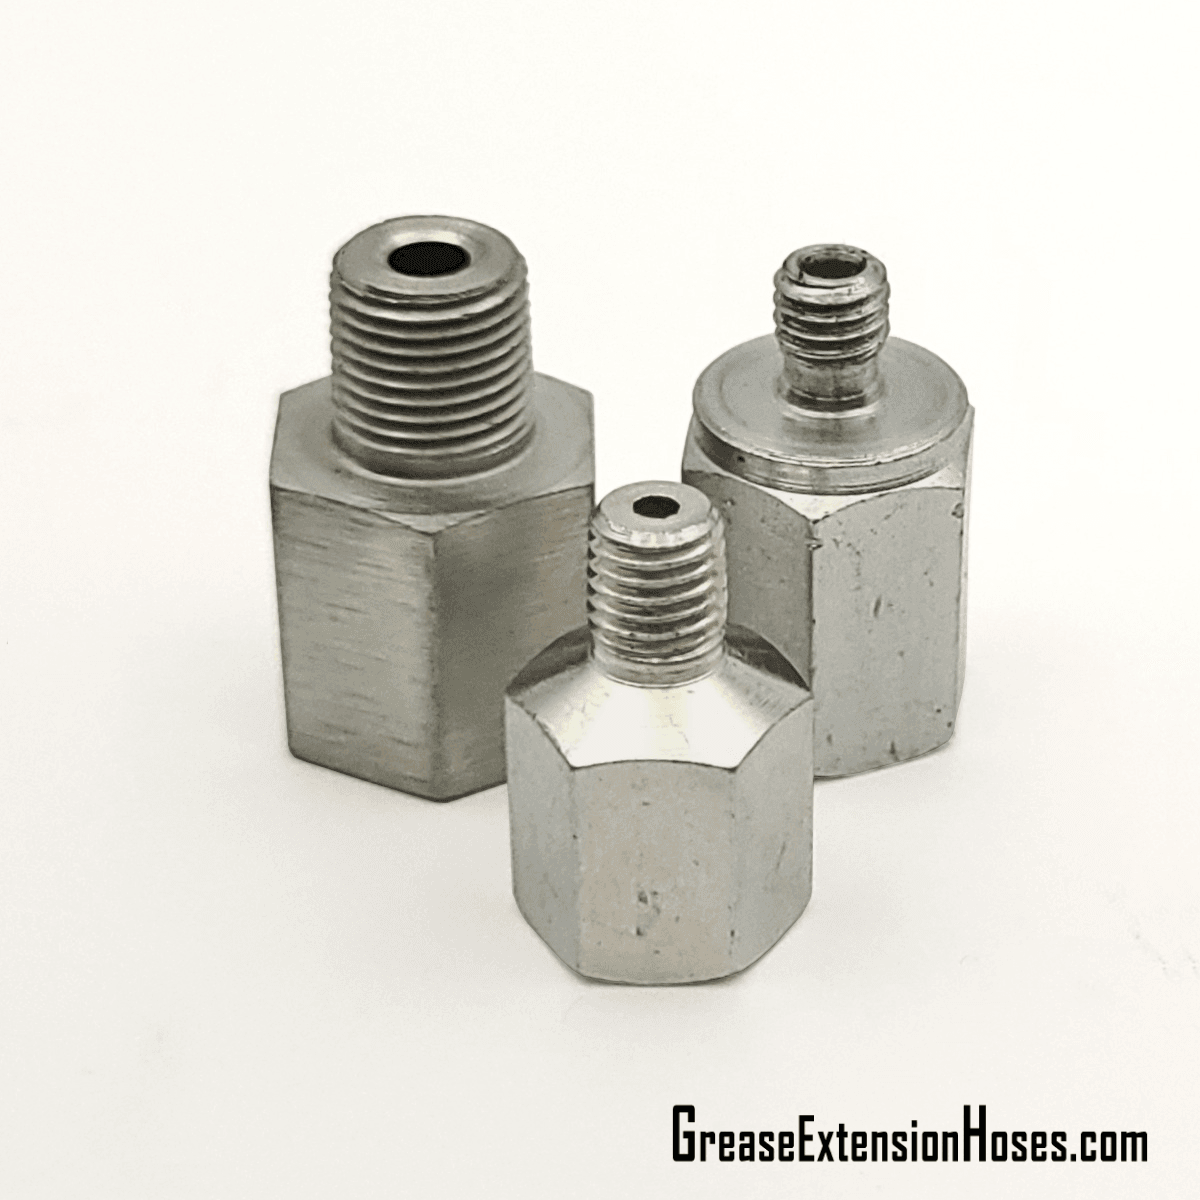 Grease Fitting Thread Adapters